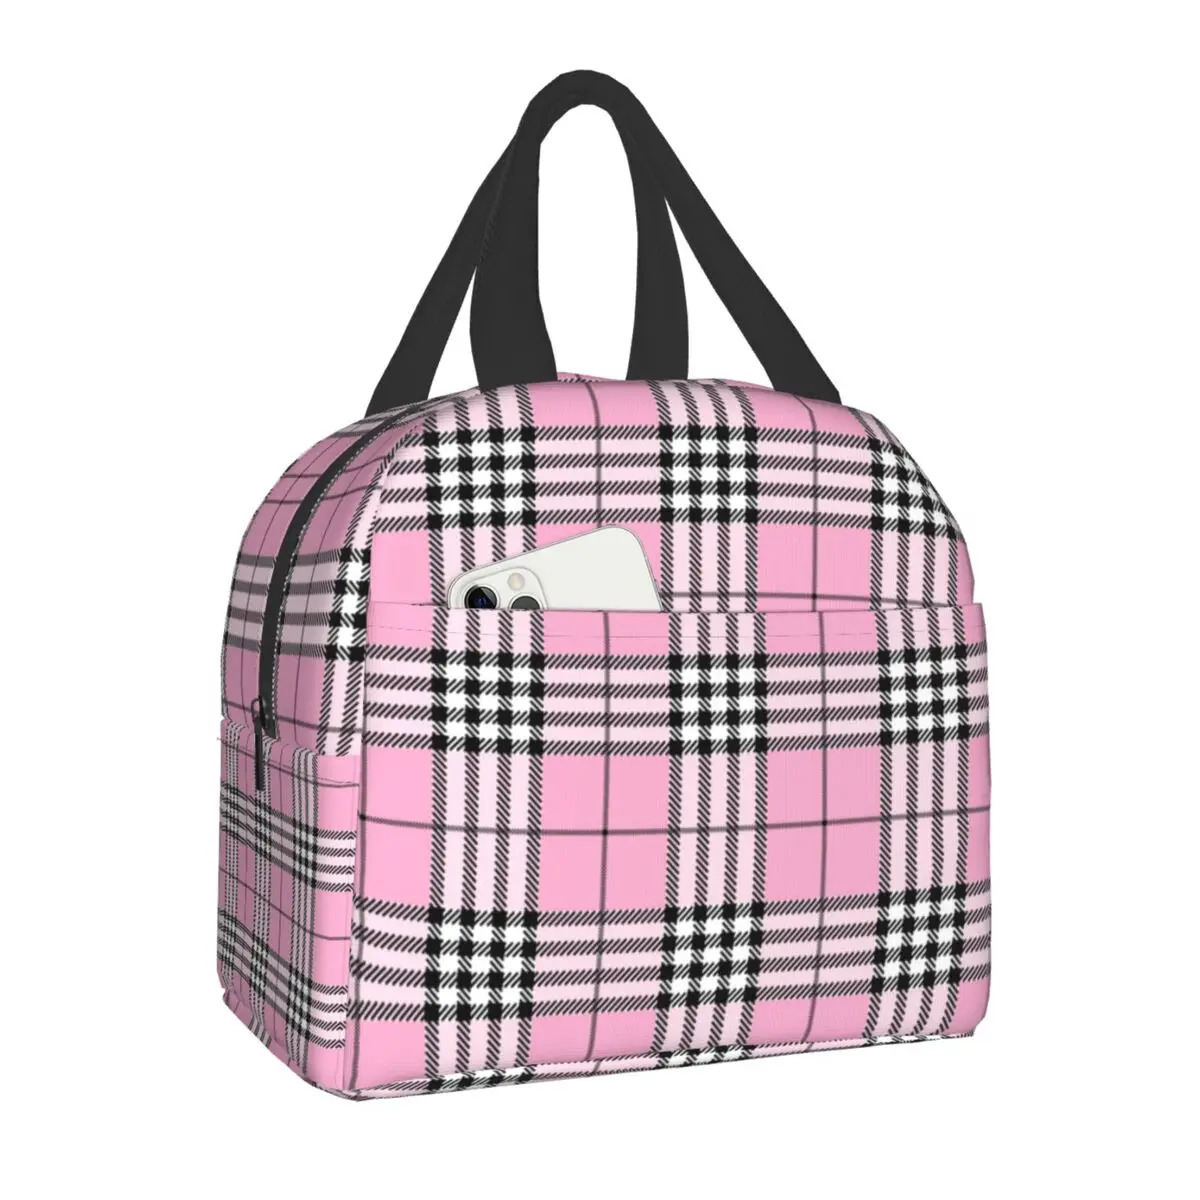 

Classic Scottish Tartan Plaid Insulated Lunch Bags Geometric Gingham Check Portable Thermal Cooler Food Lunch Box Kids School